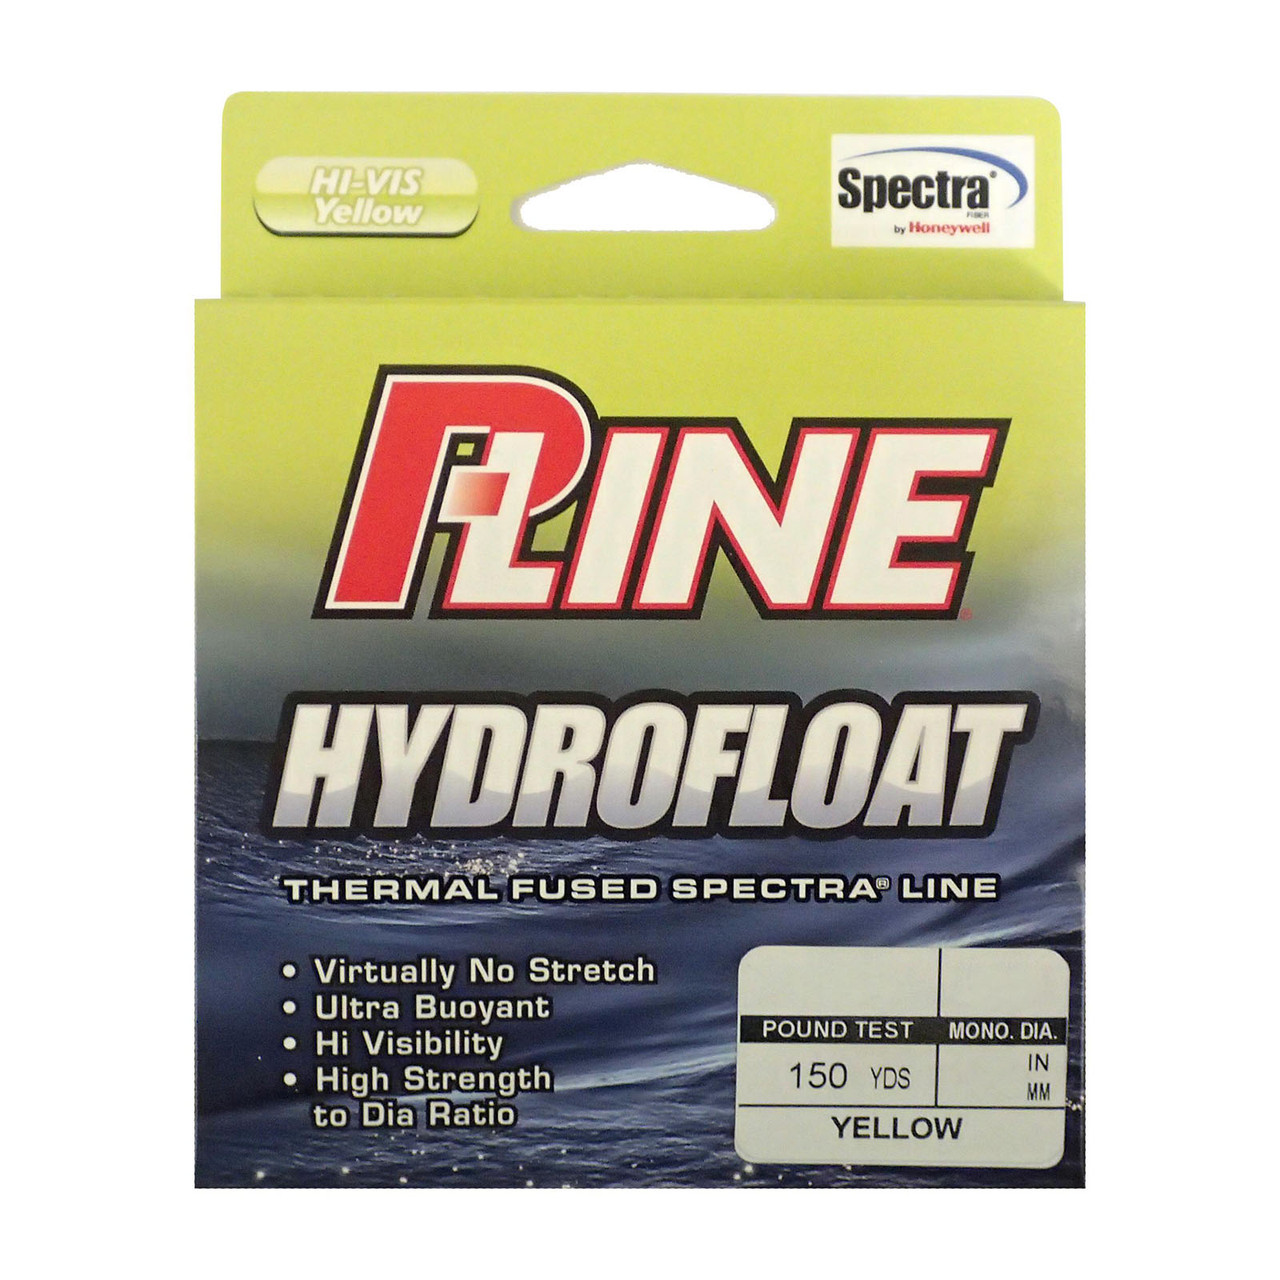 P-Line Hydrofloat Thermal Fused Spectra Line